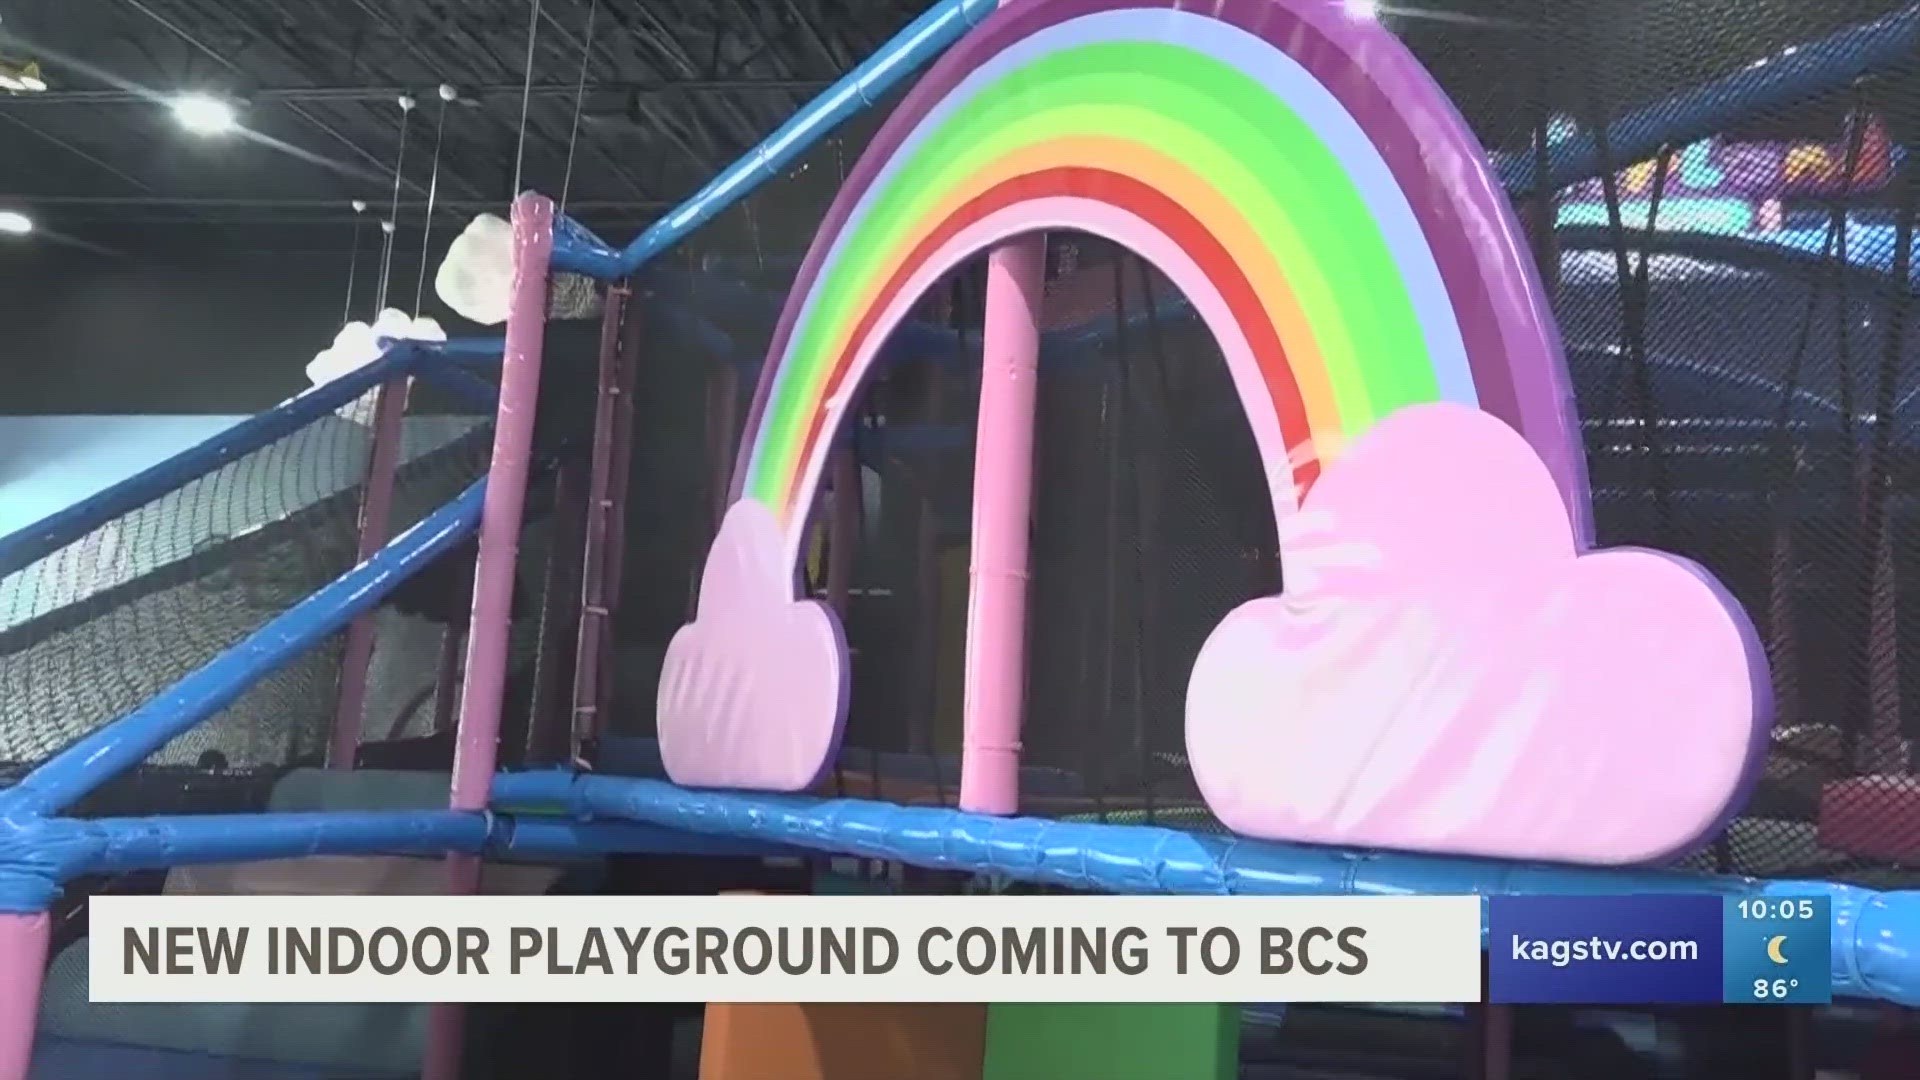 Wonderland Indoor Playground will be one of the first indoor playgrounds in the BCS, in hopes of providing relief for families.